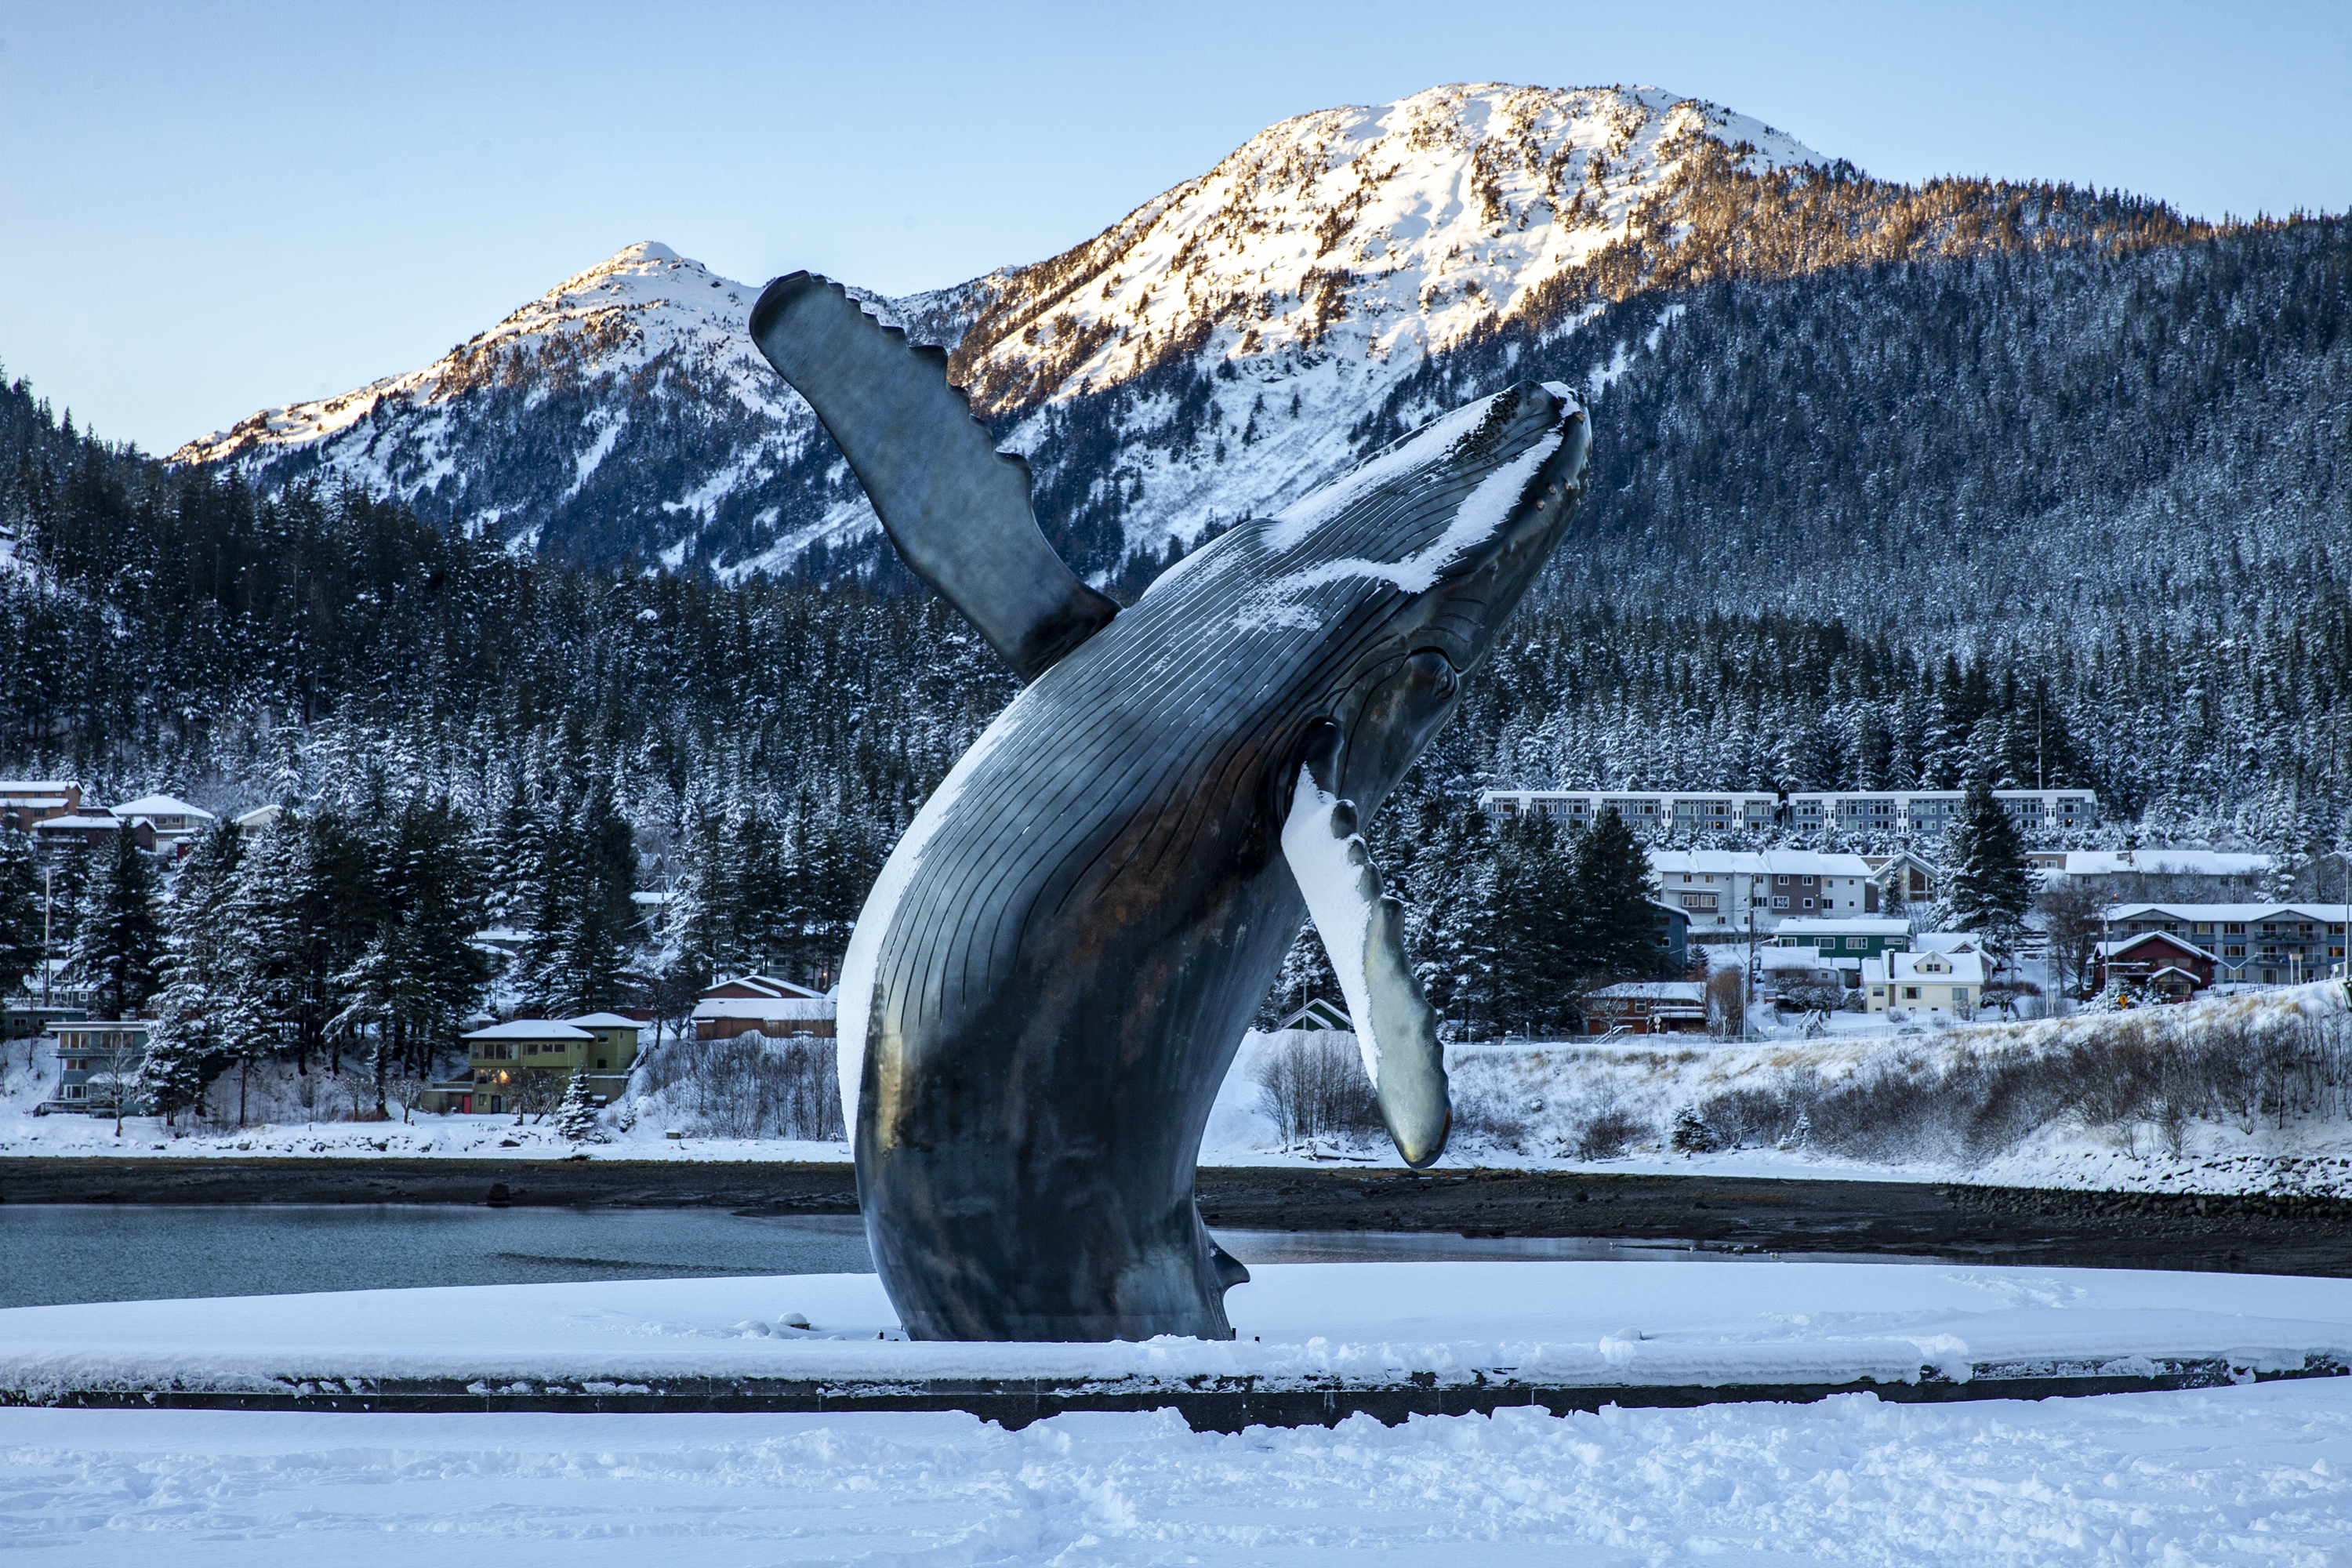 More winter weather on its way to Juneau